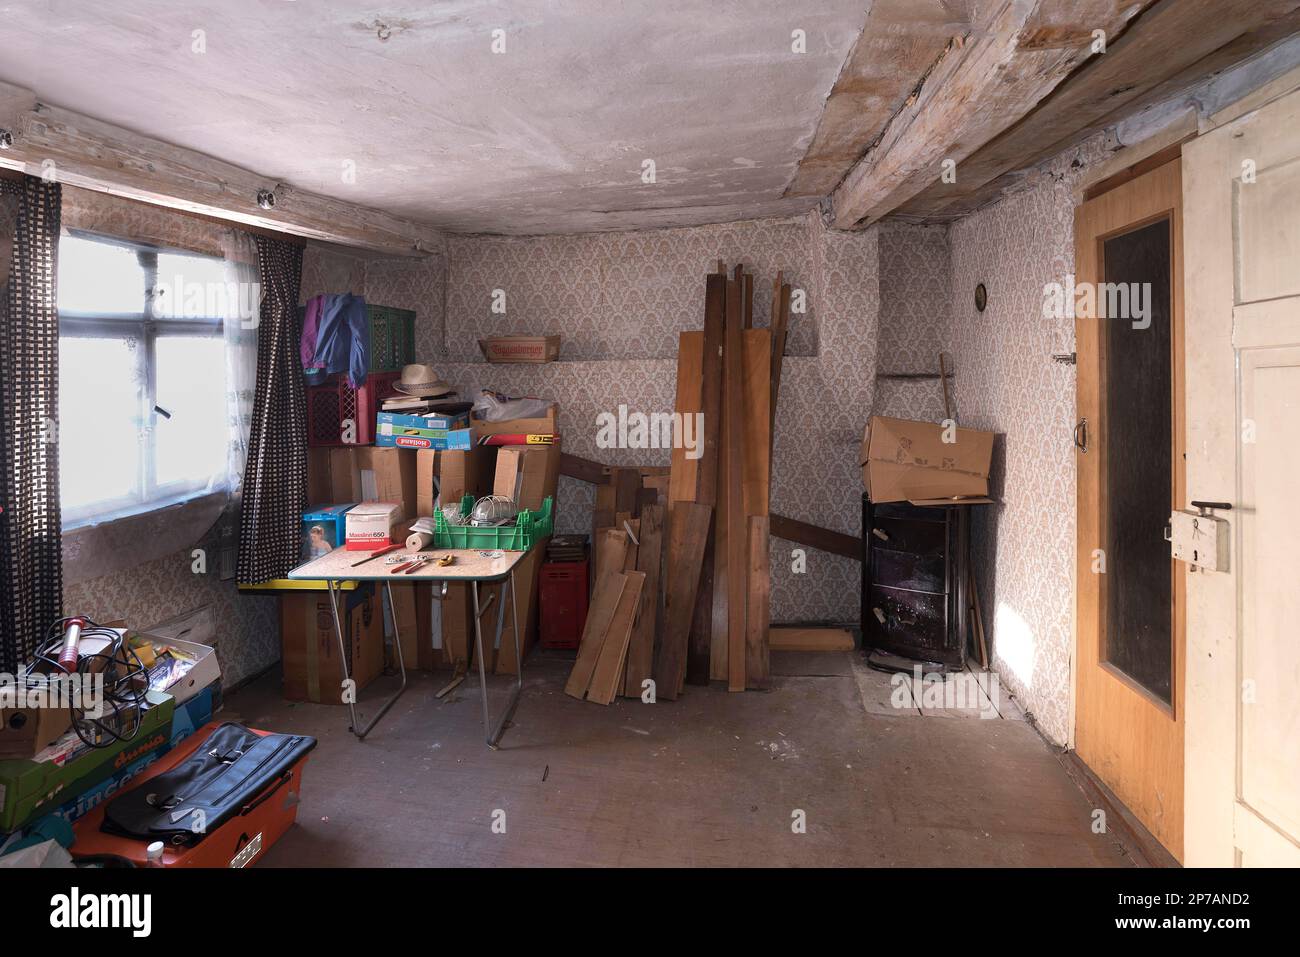 Room with a legacy in an old town house that has been unoccupied for years, Bavaria, Germany Stock Photo